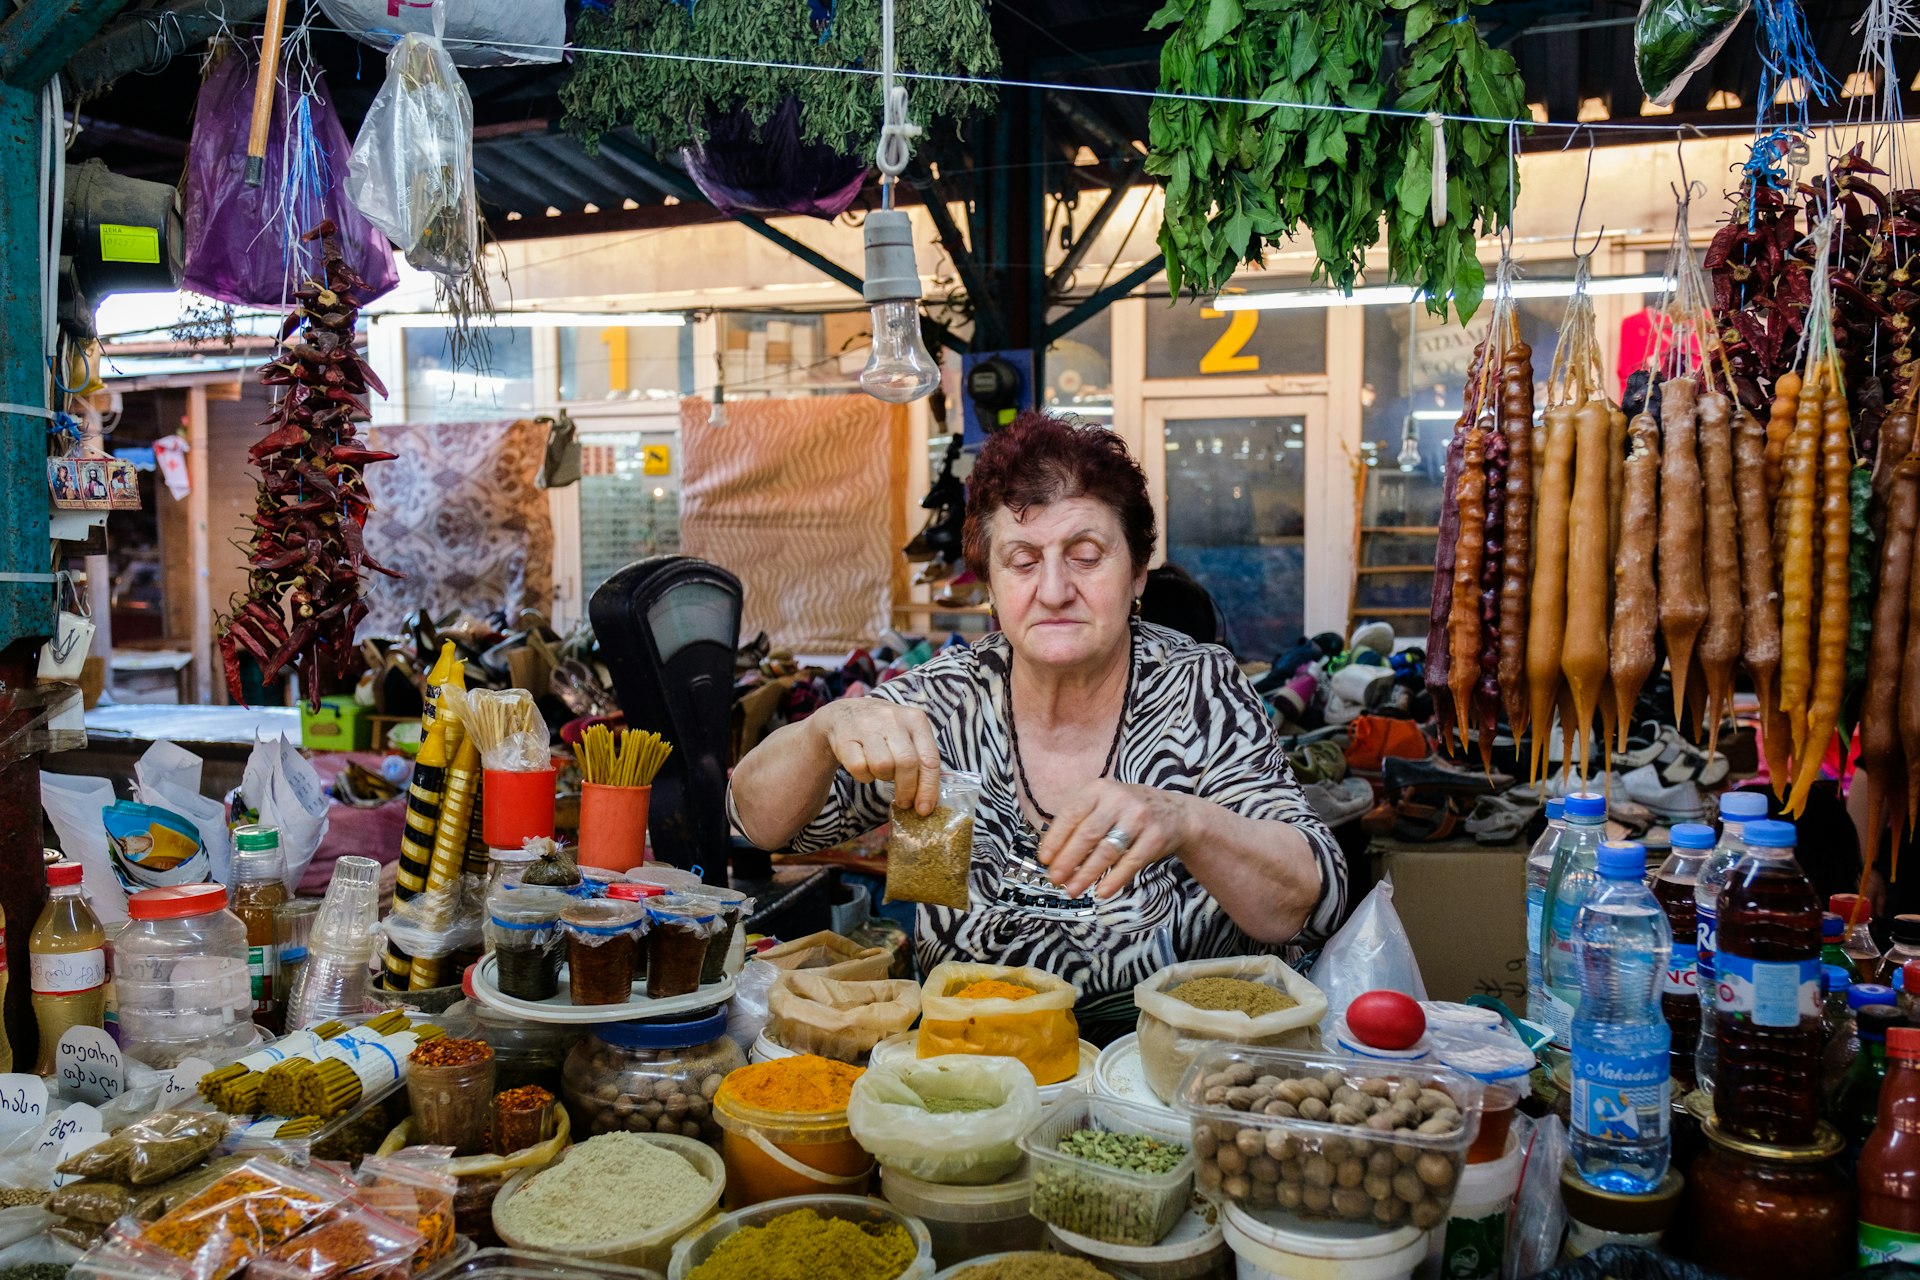 A senior woman is packaging up spices in a market stall in Kutaisi, Georgia